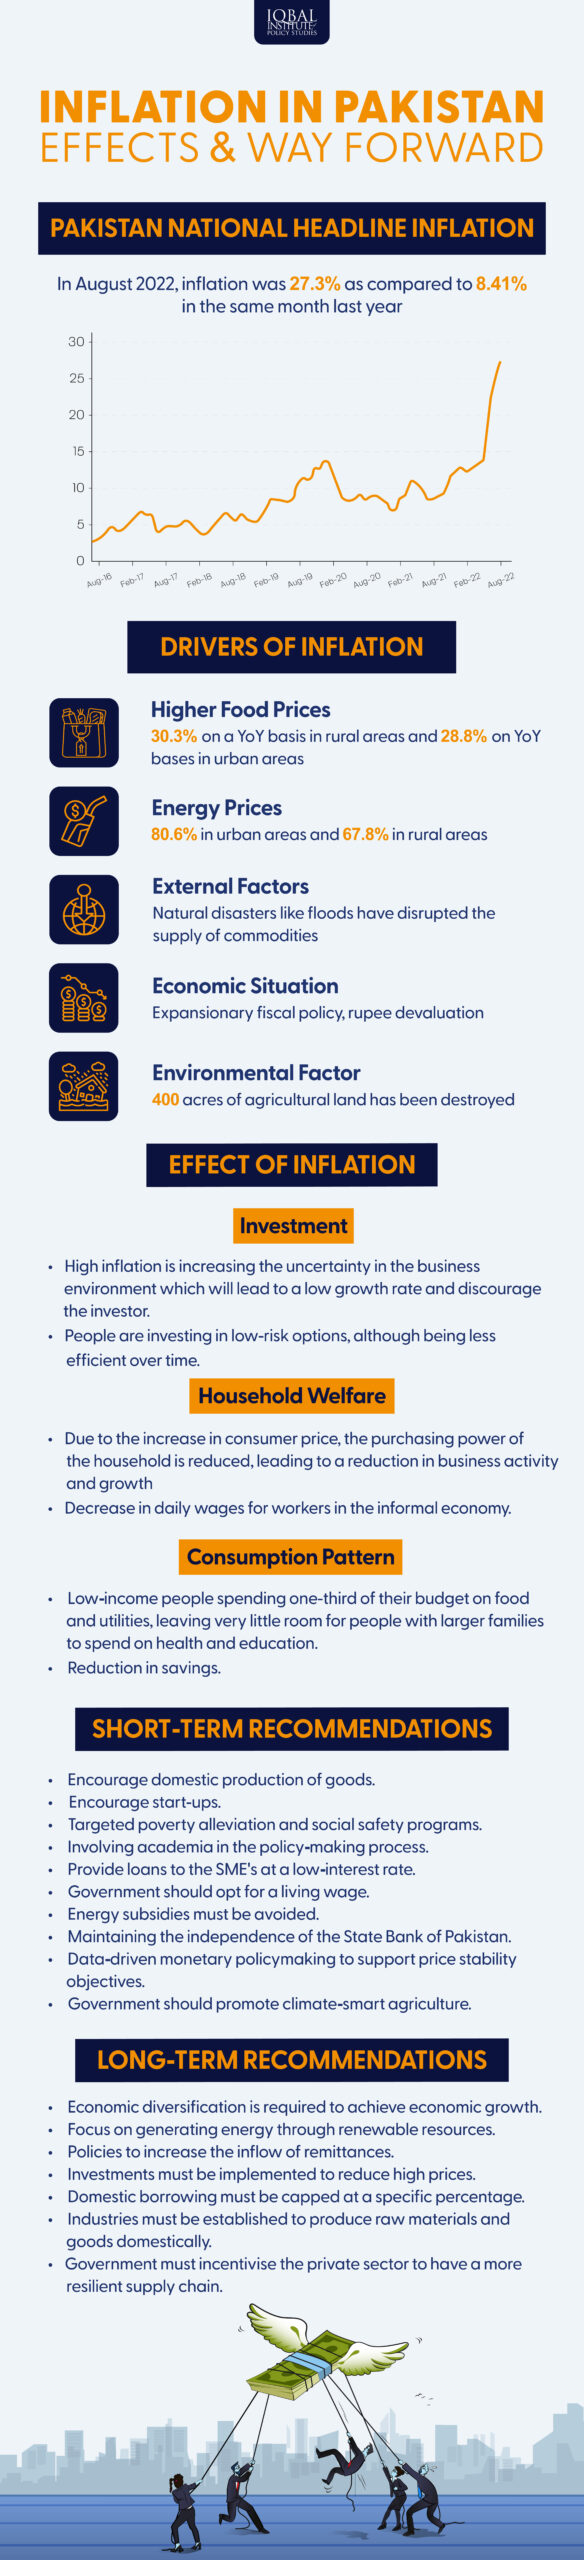 Inflation in Pakistan: Effects and Way Forward